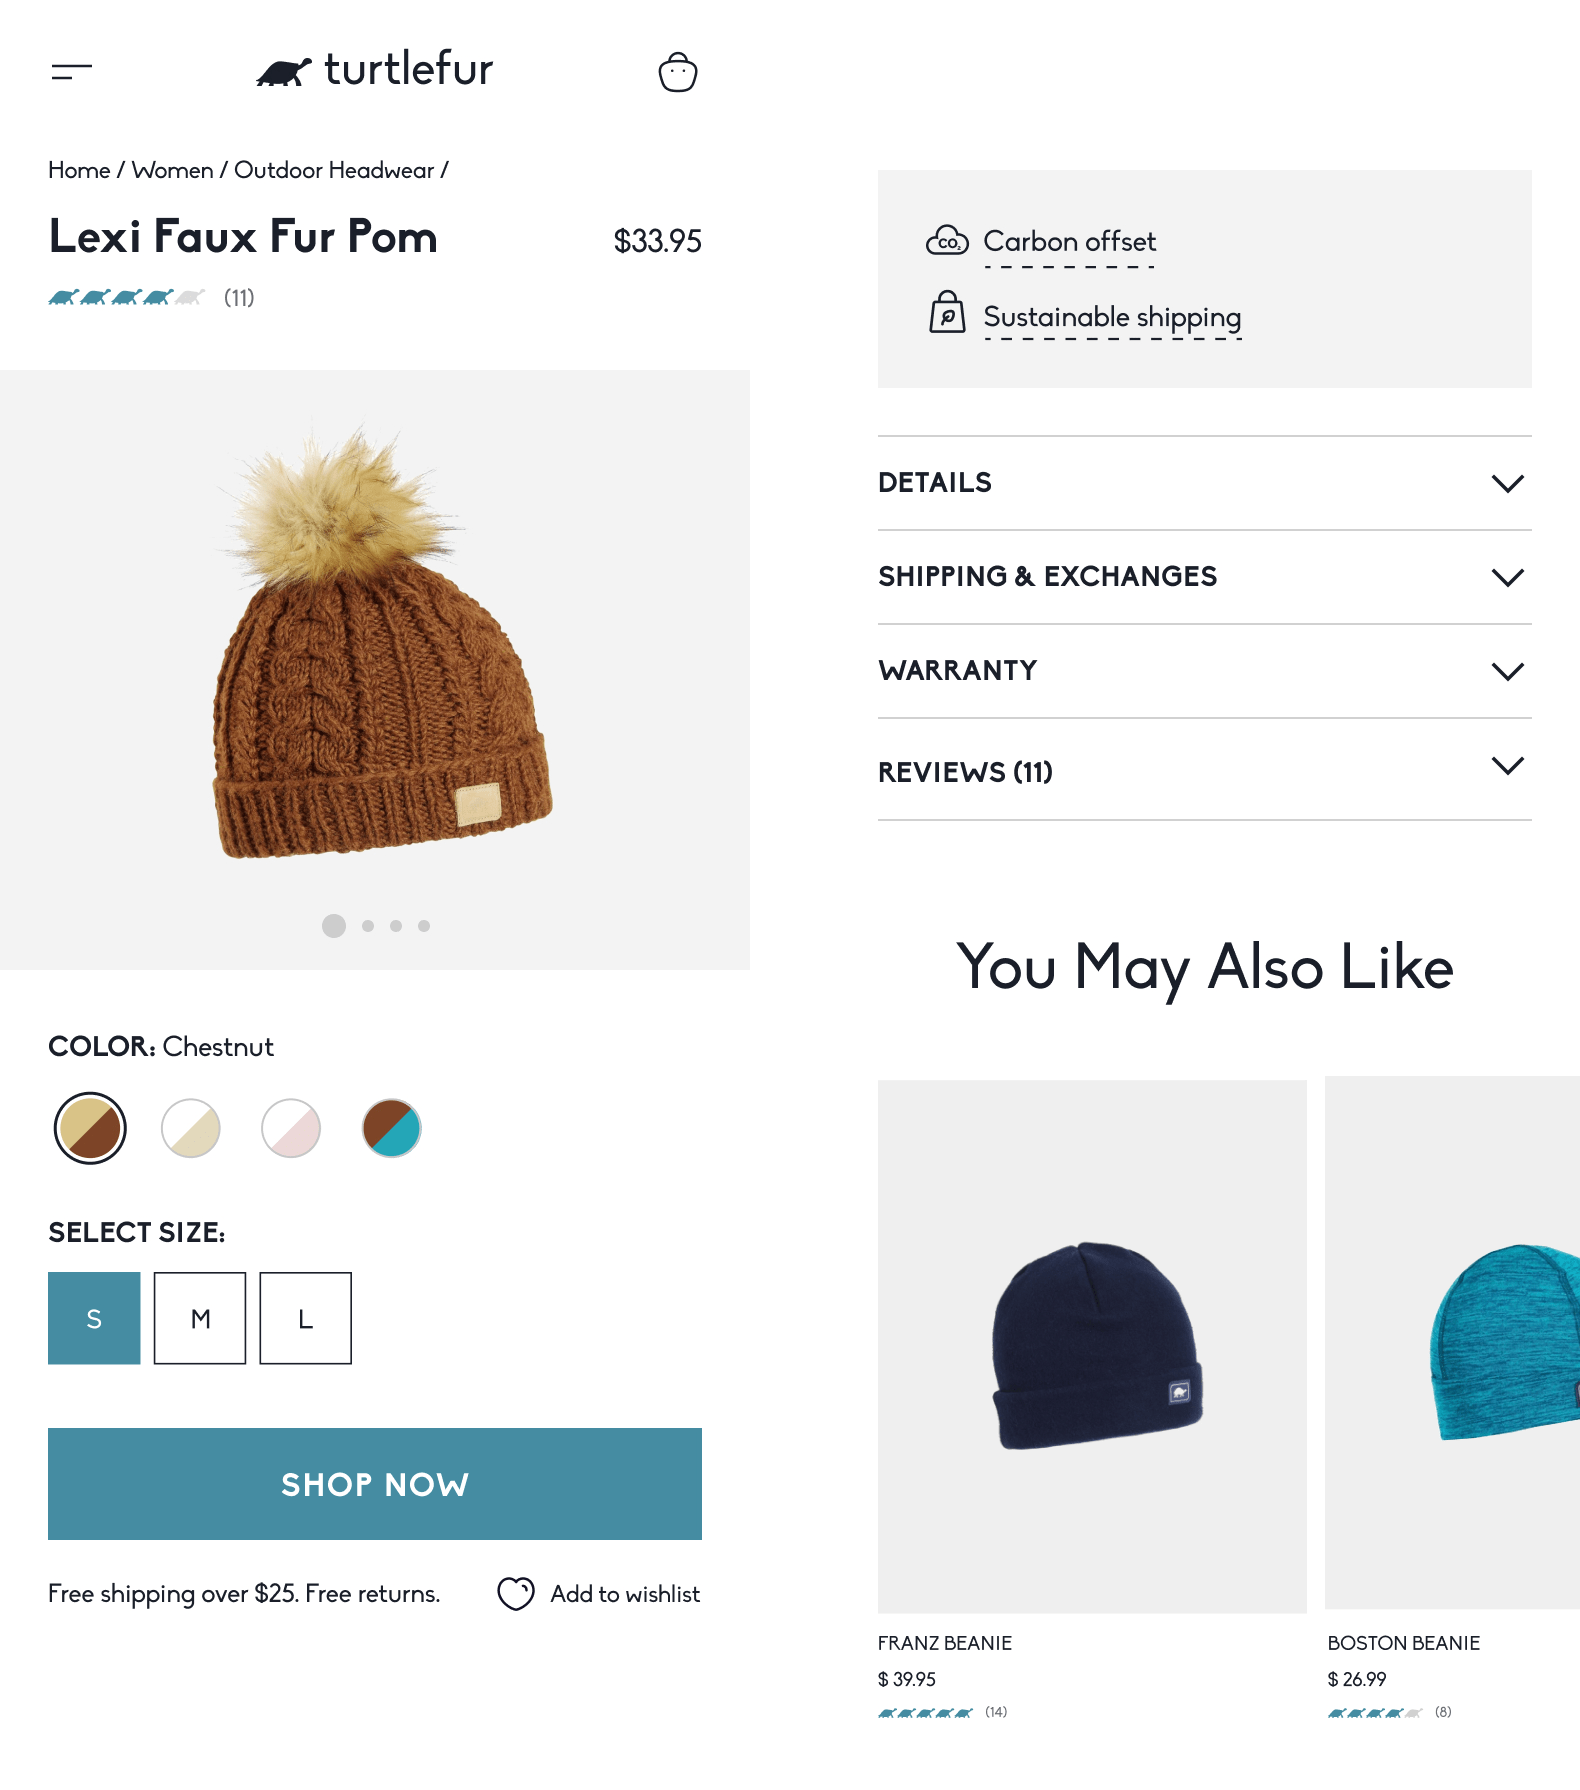 Mobile version of Product page layout